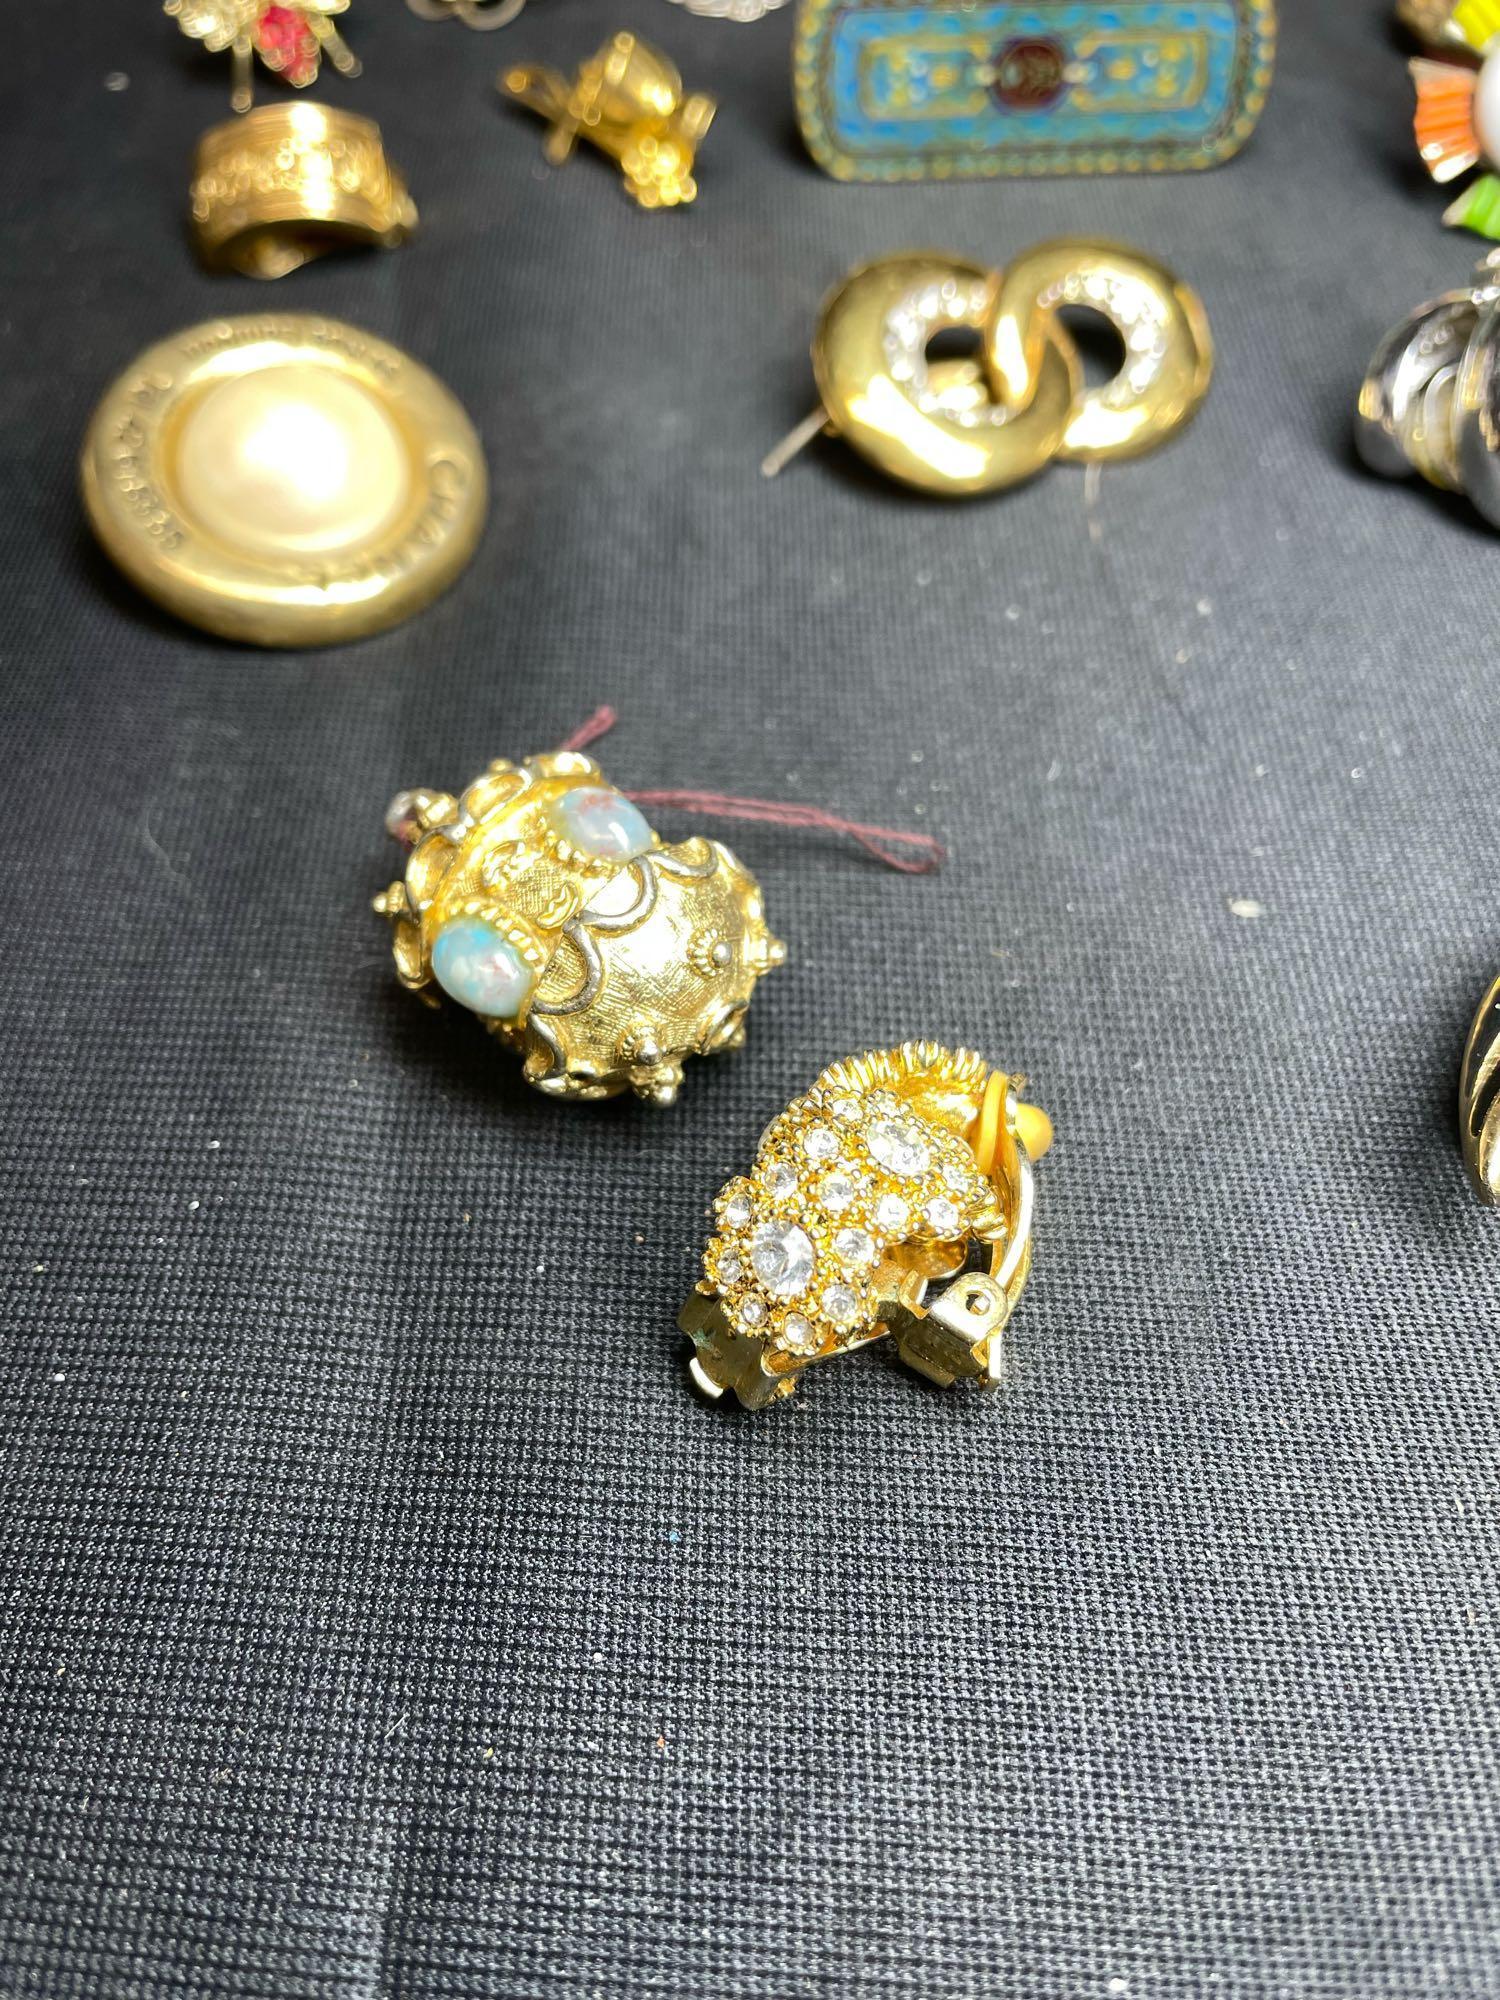 High End Snap On Ear Rings, Vintage Cameos. Chanel, C. Dior, Haskell, Givenchy